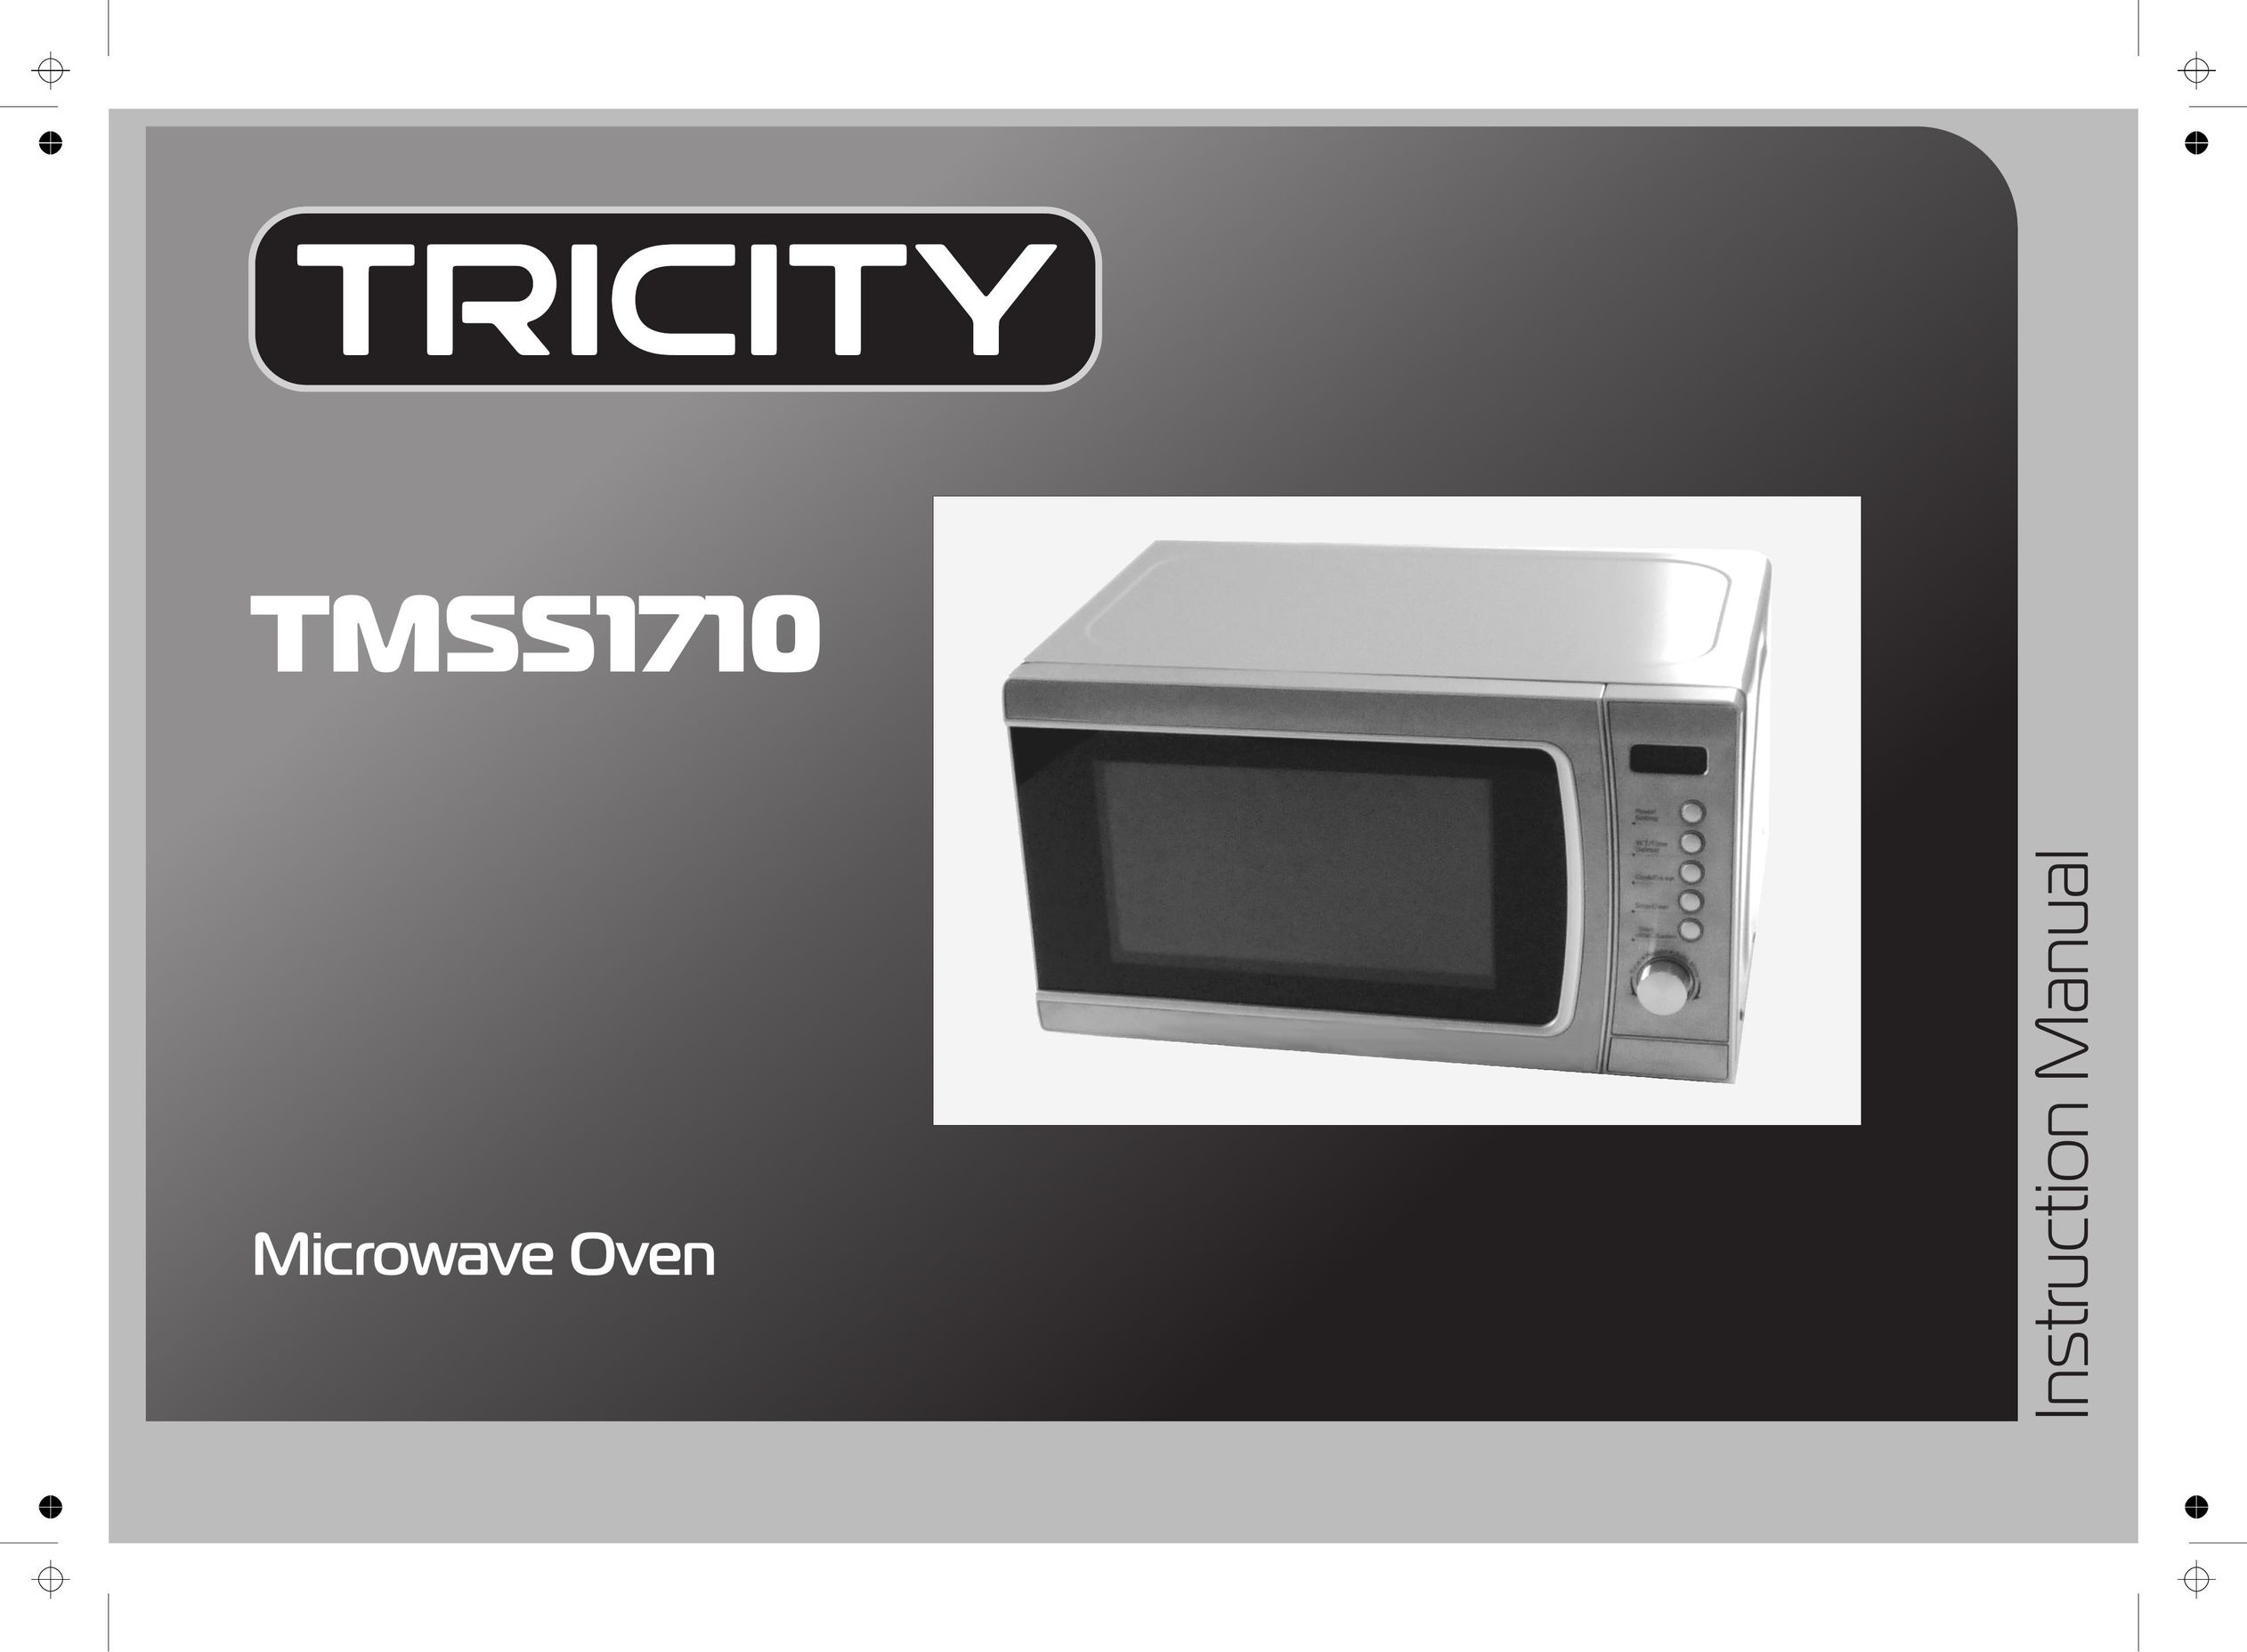 Tricity Bendix TMSS1710 Microwave Oven User Manual